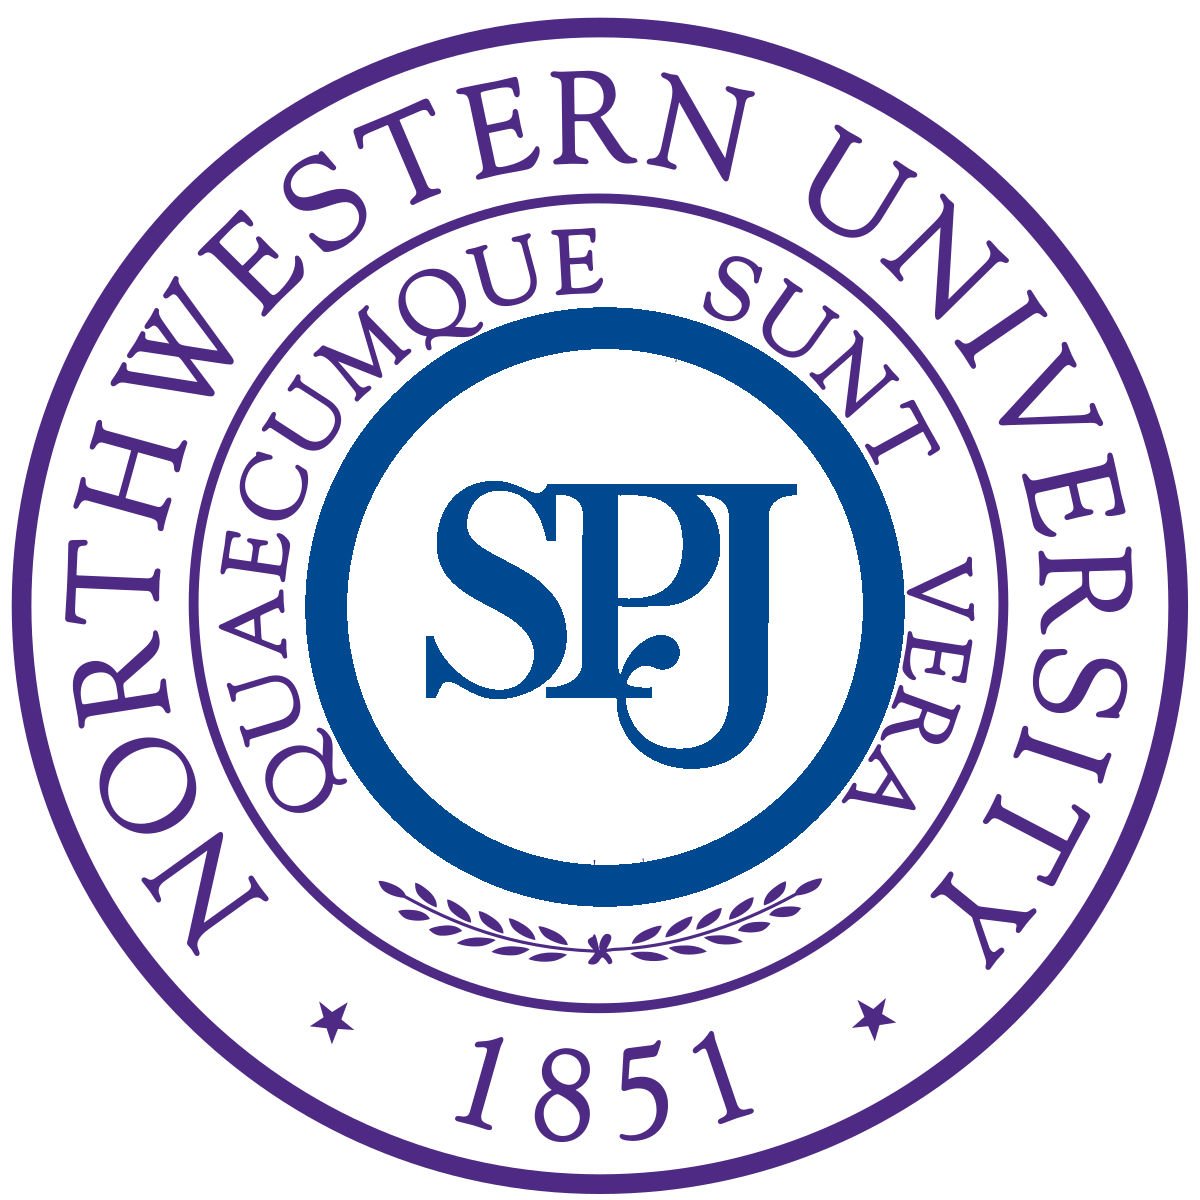 The official Twitter account for the Medill chapter of the Society of Professional Journalists. Follow us here for chapter updates, resources and event info!